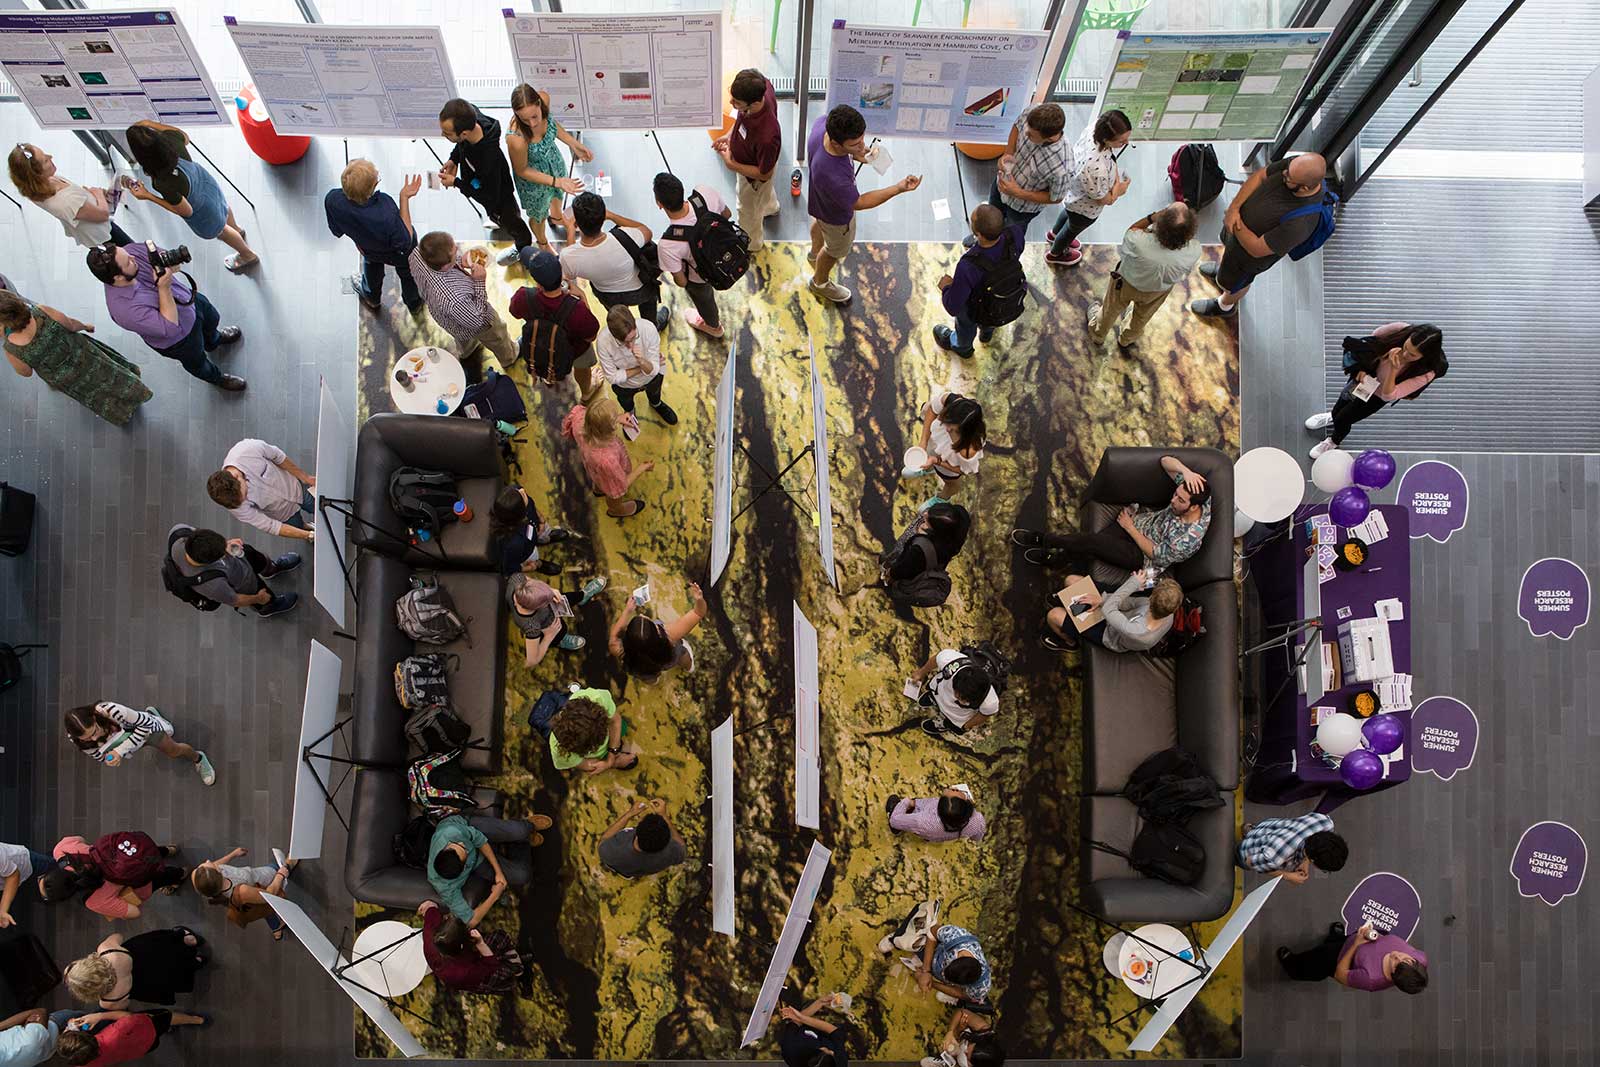 Bird's eye view of the Summer Research Poster Session